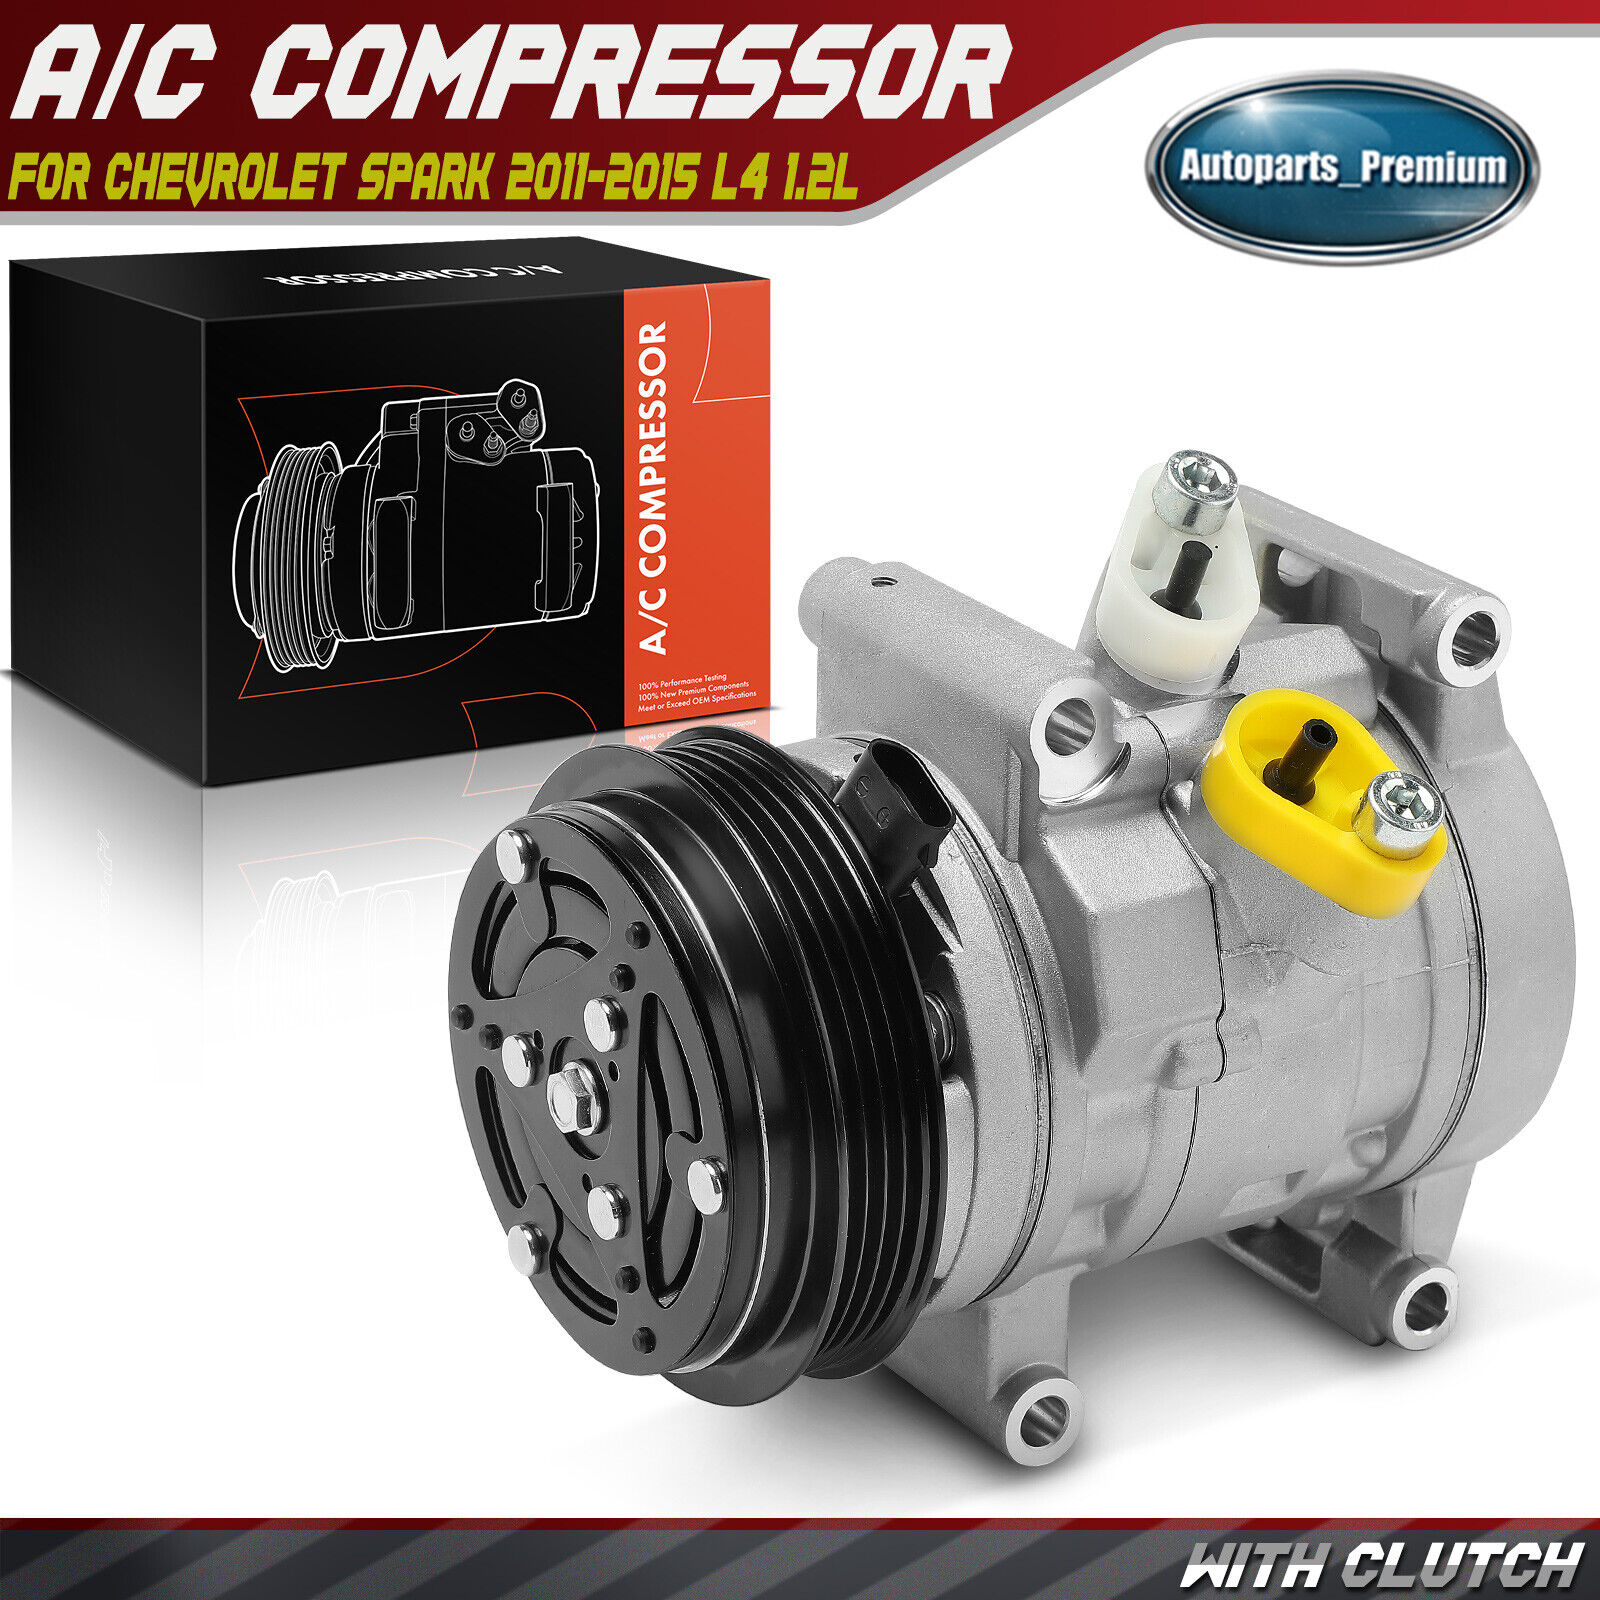 A/C Compressor with Clutch for Chevrolet Spark 2011 2012 2013 2014 2015 L4 1.2L